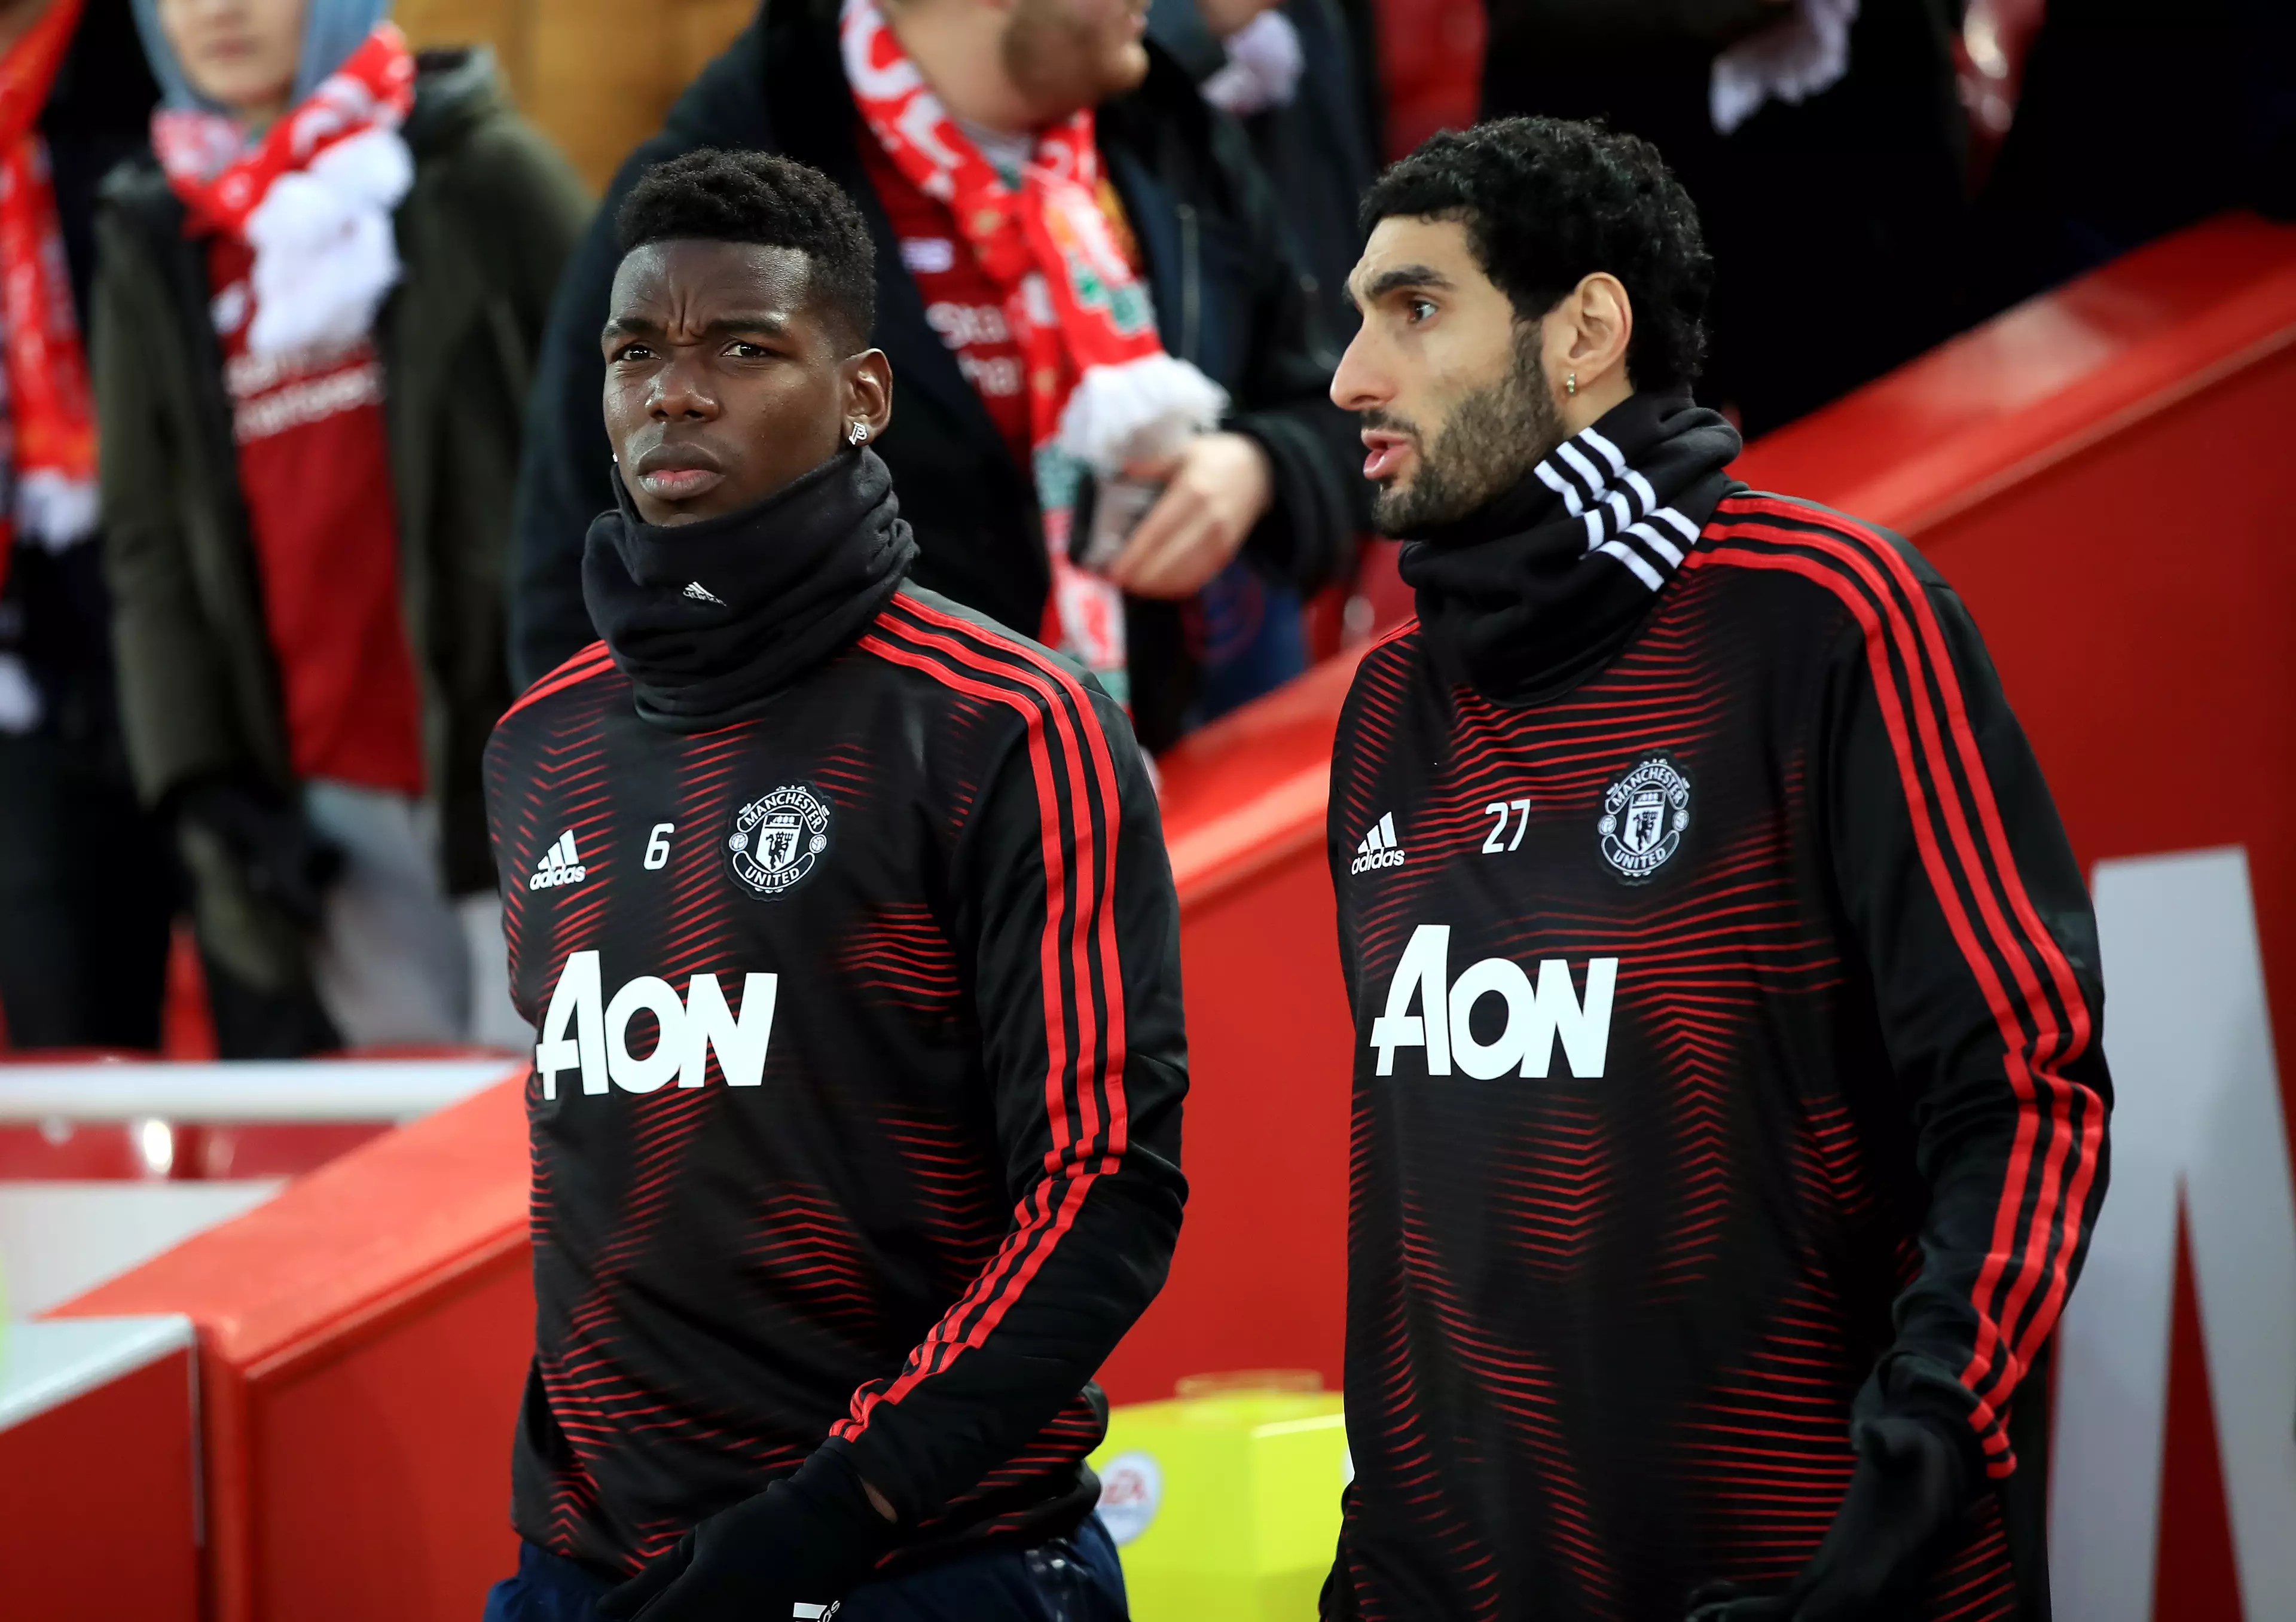 Pogba didn't get out of his training gear on Sunday. Image: PA Images